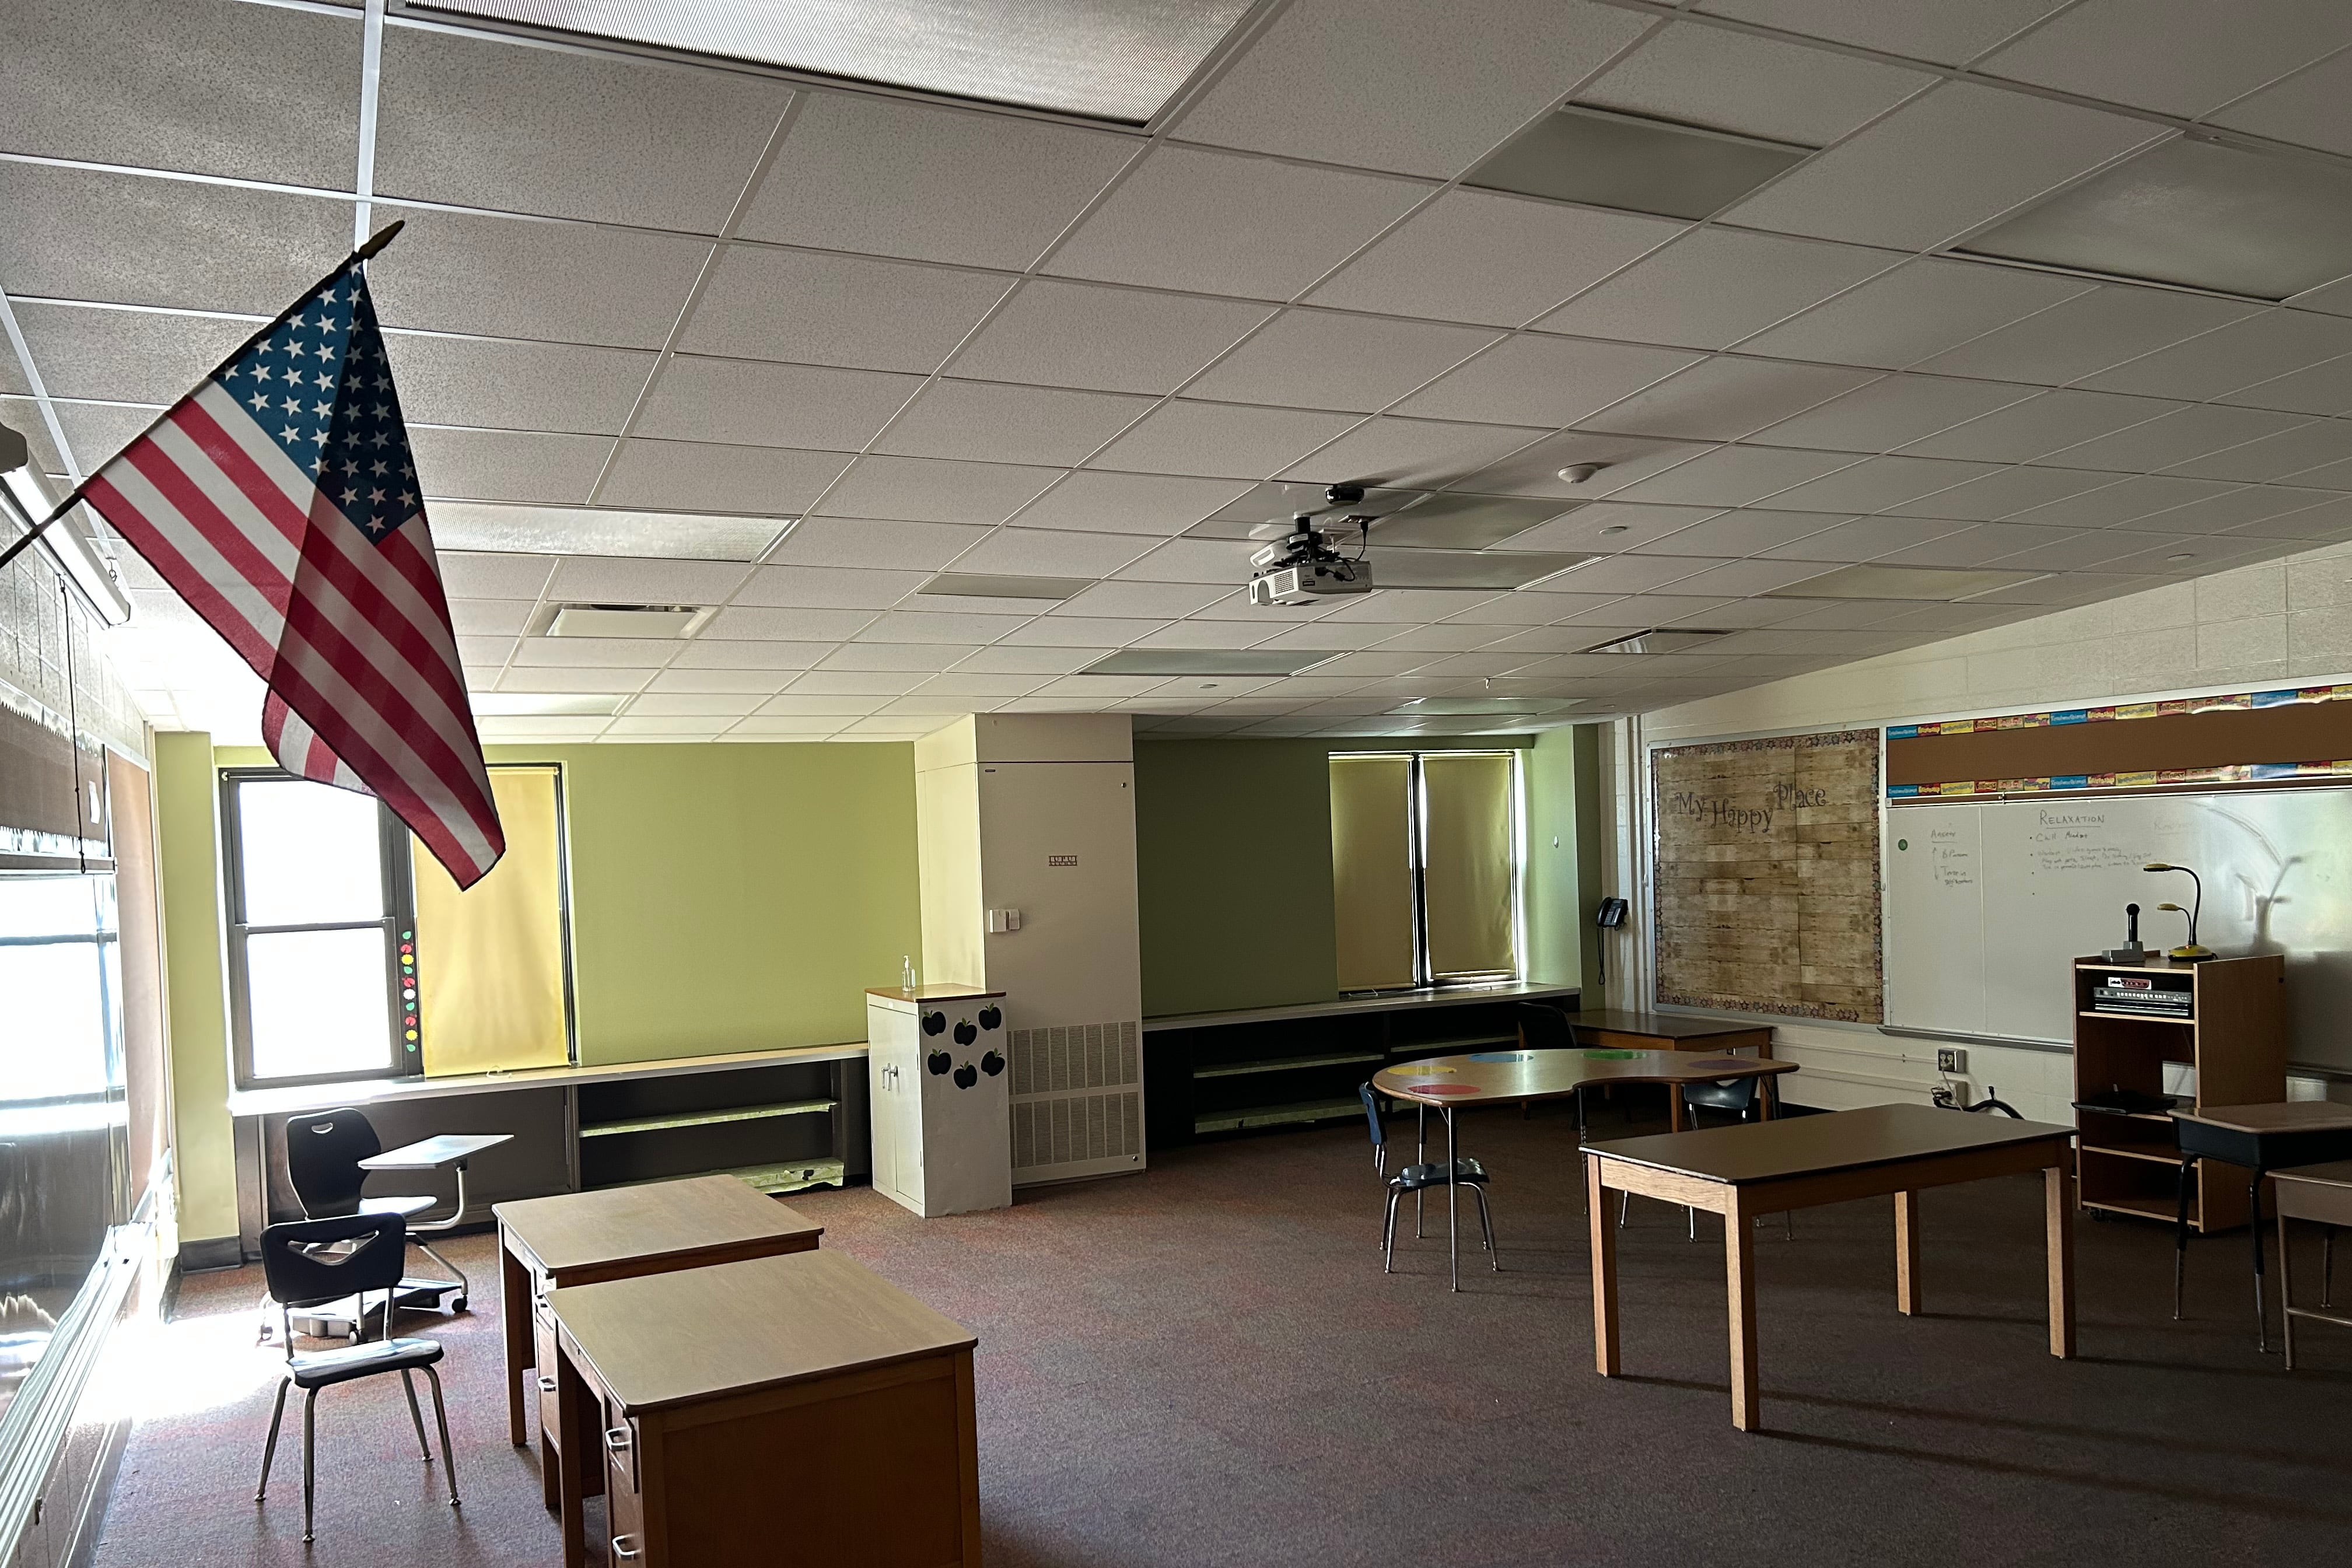 Sun peeks through a window into an empty classroom with an American flag hanging on the wall in the foreground.